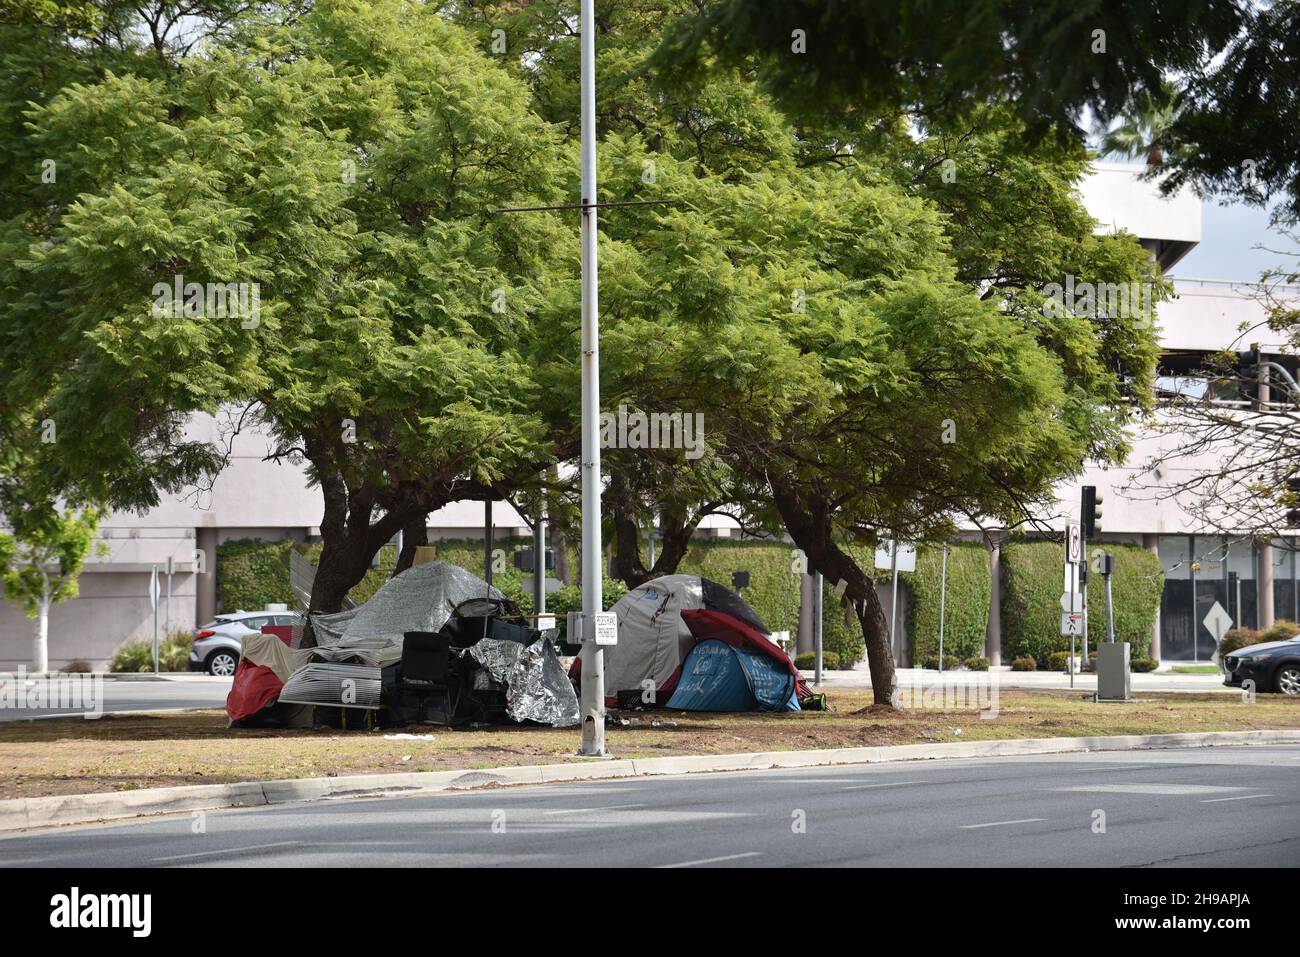 Beverly Hills, CA USA - October 22, 2021: Homeless encampment in Beverly Hills in front of an office building Stock Photo